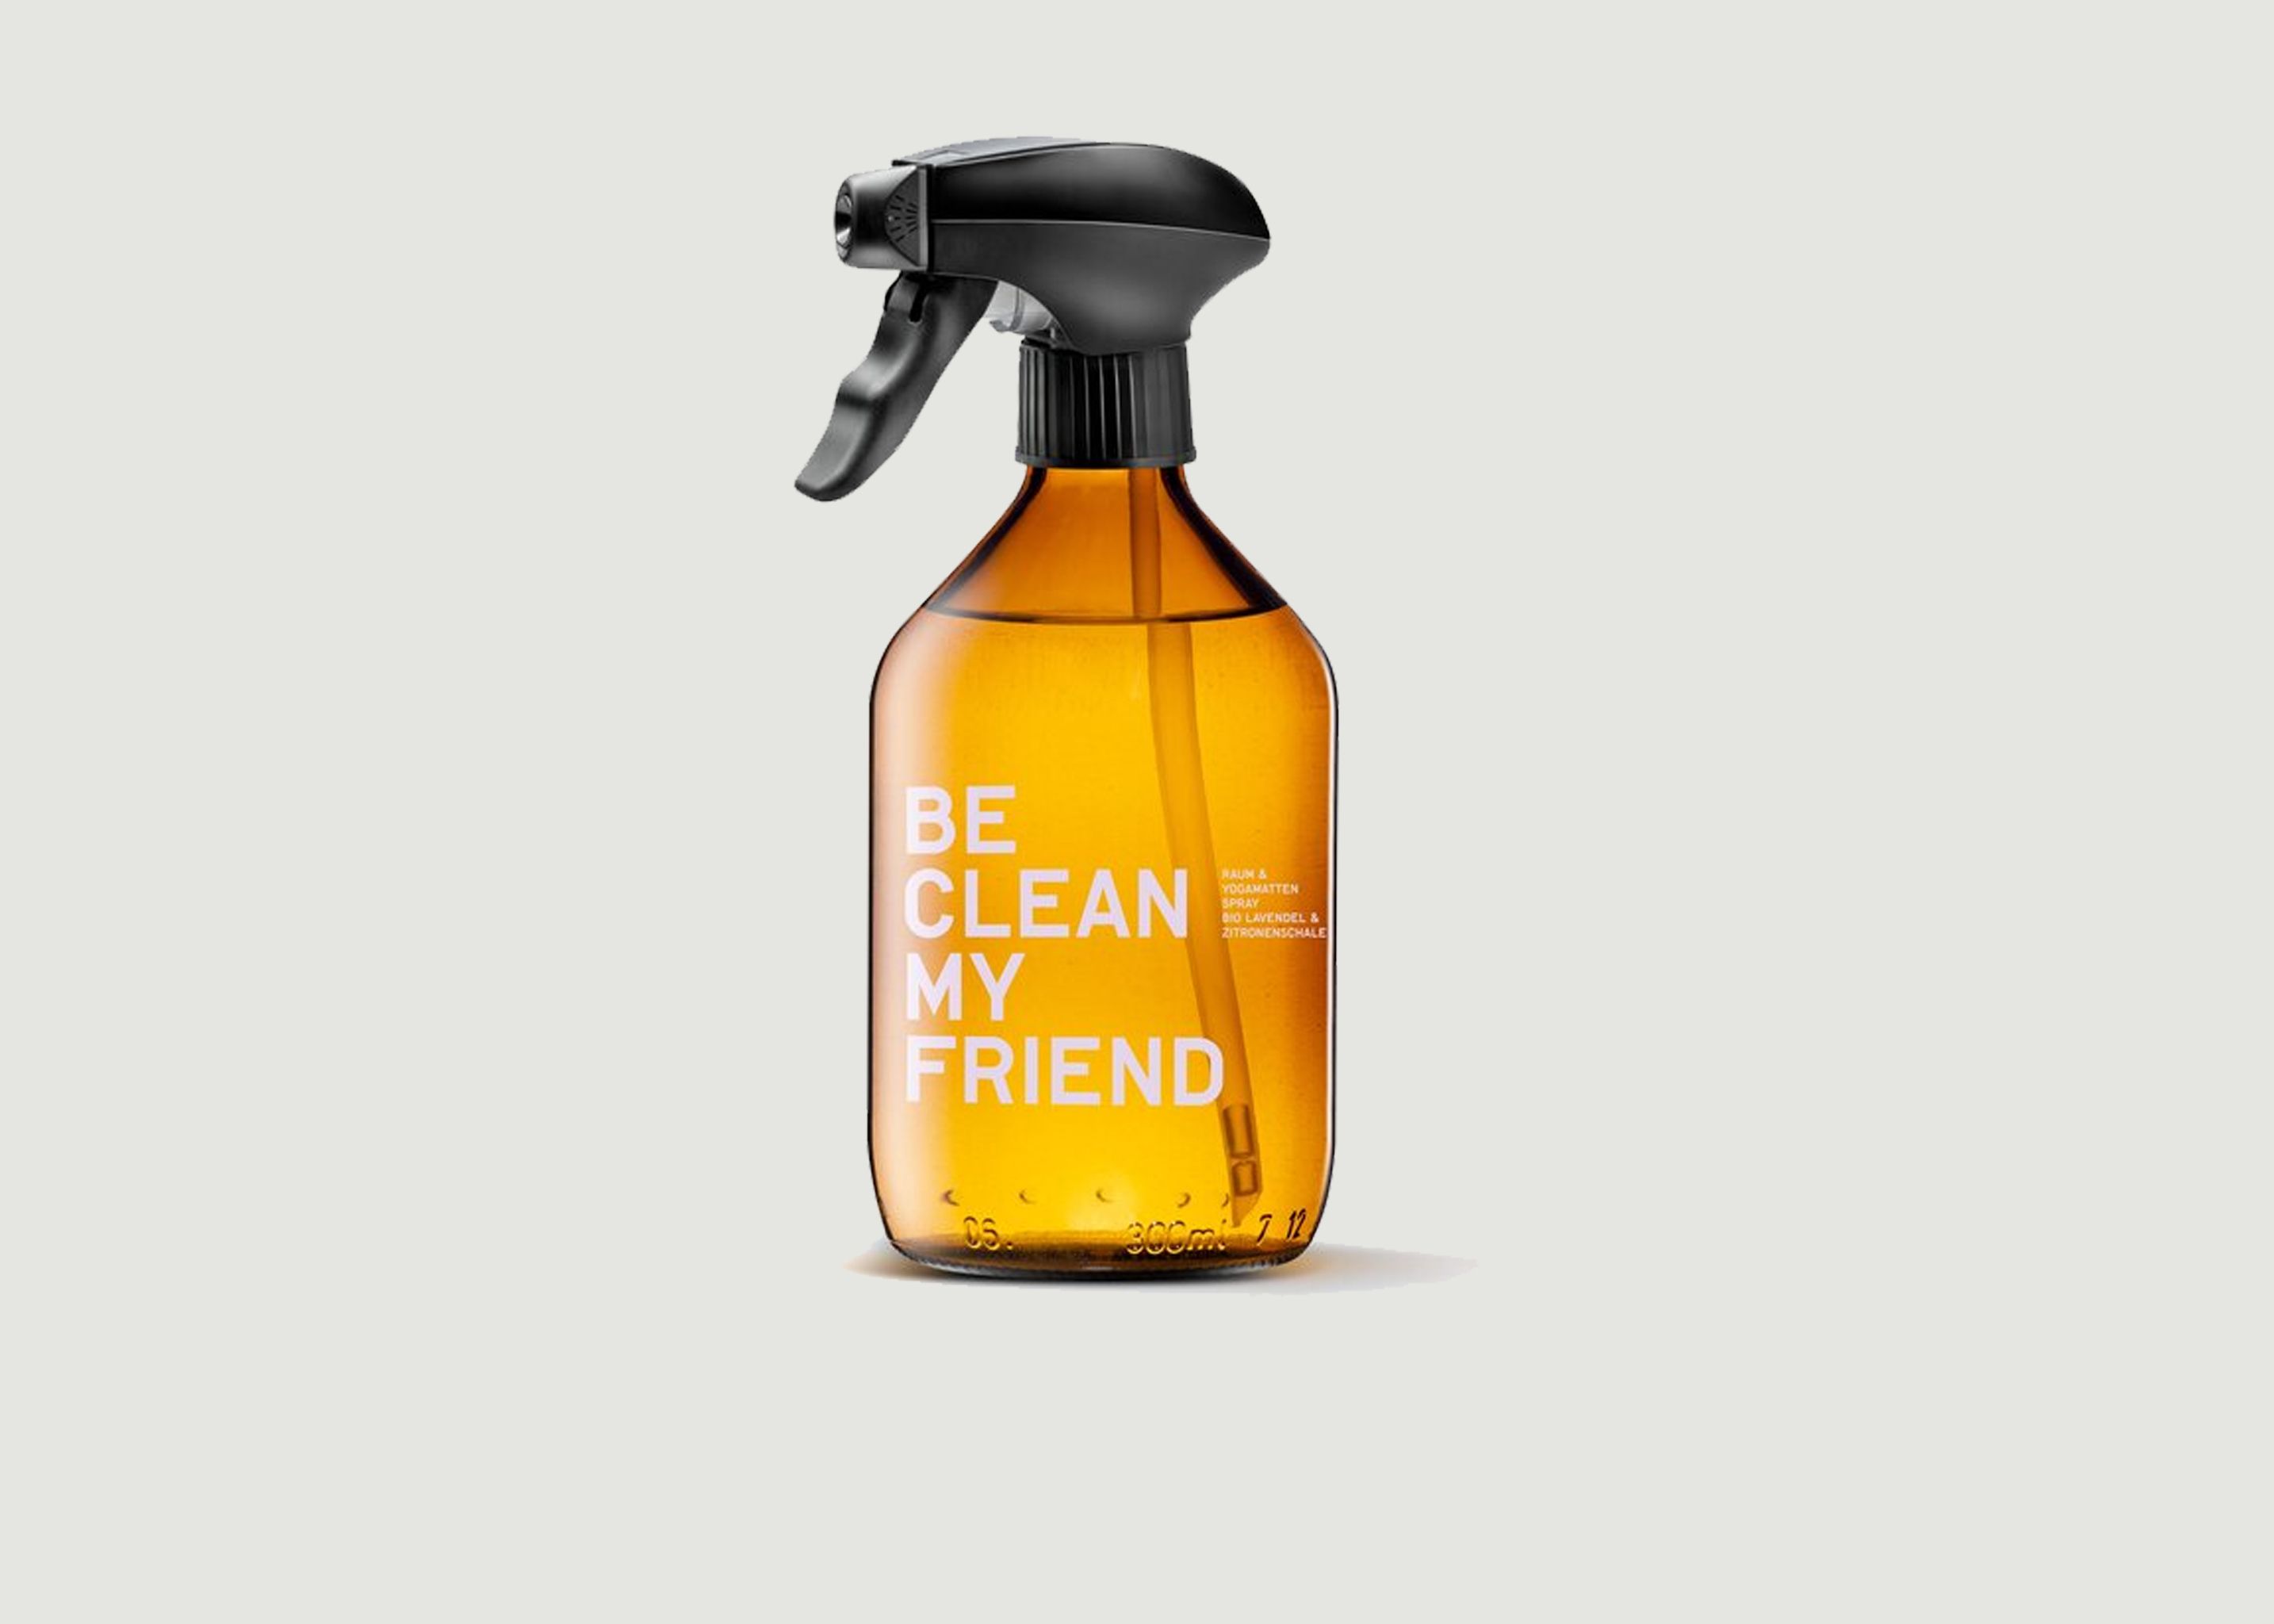 Indoor and yoga mat spray lavender and lemon zest - 300 ml - Be Soap My Friend